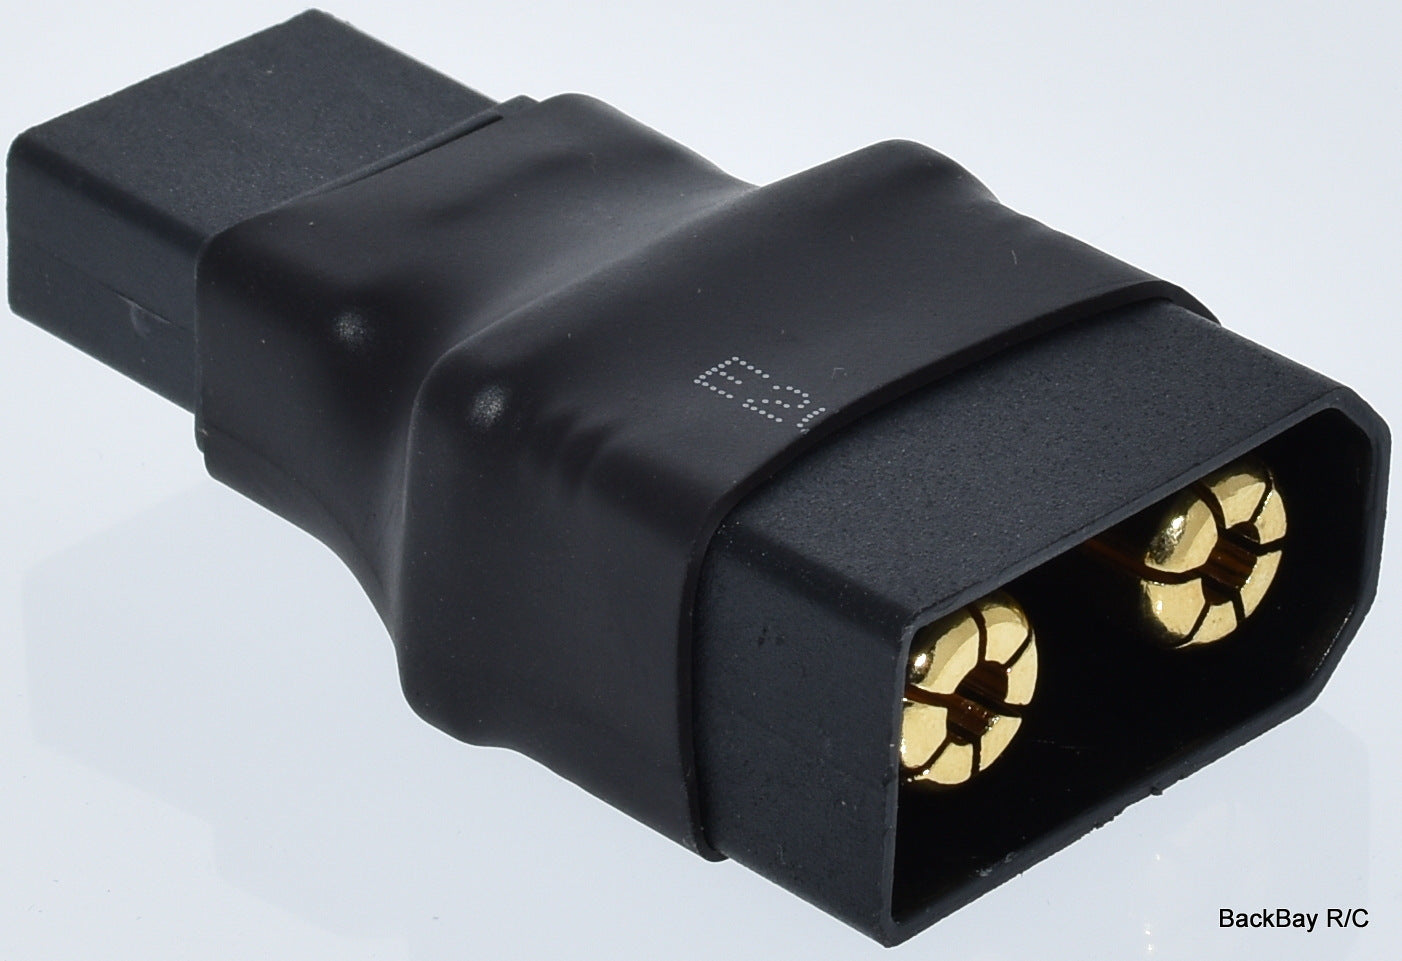 QS8-S Male to Female XT90 Adapter - All Black - No Wires Adapter